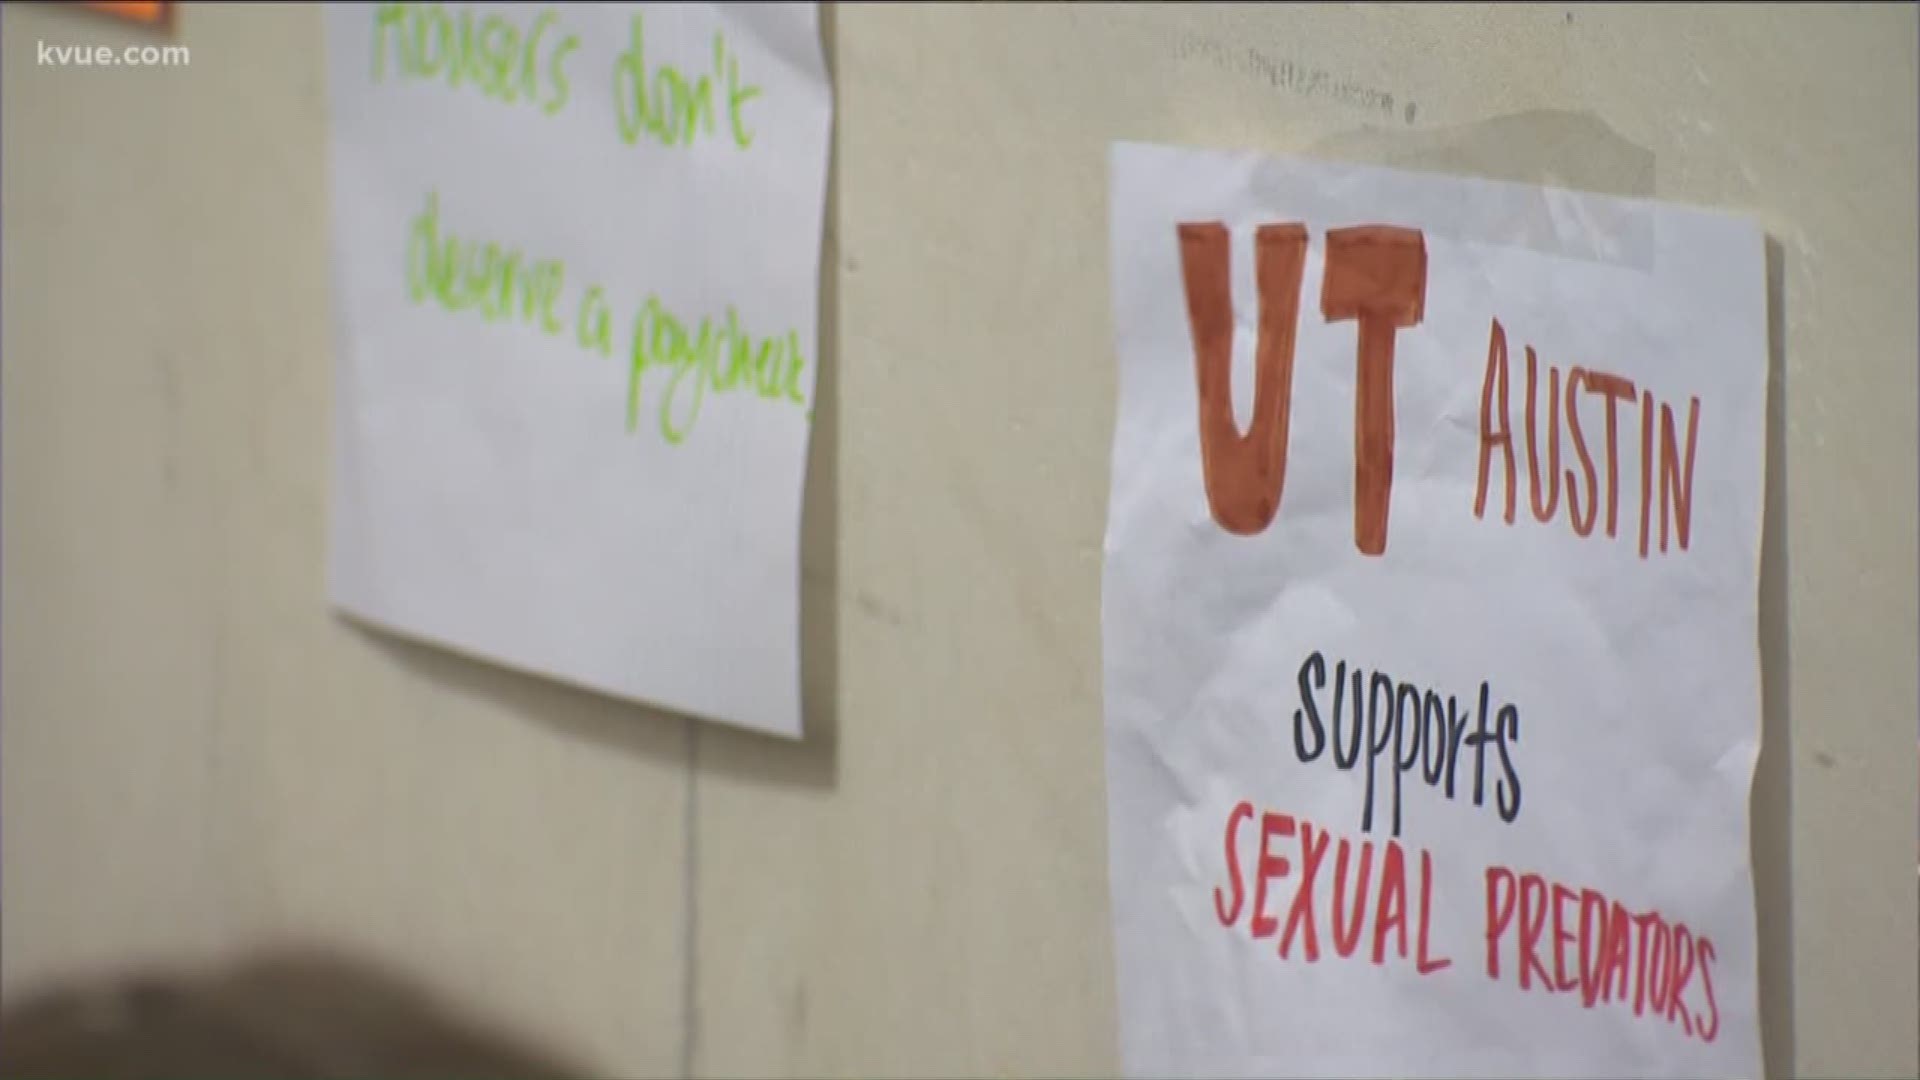 Groups of students posted signs outside administrative offices at the UT Tower on Friday as part of a sit-in protest.